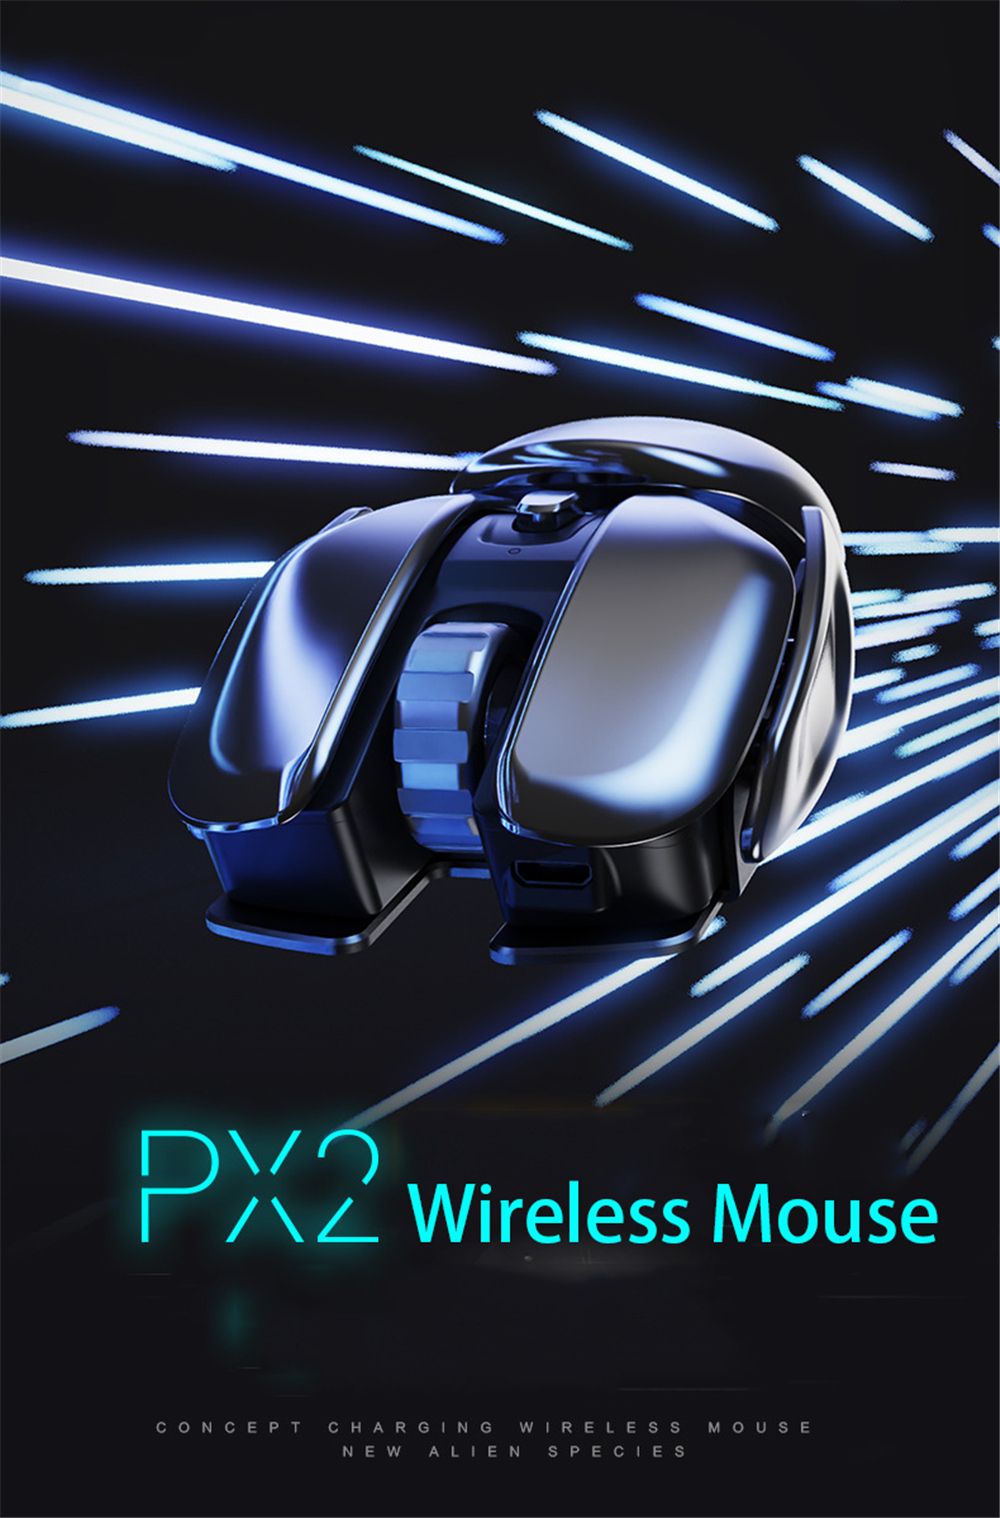 Inphic-PX2-24G-Wireless-Rechargeable-Mouse-1600DPI-Mute-Button-Two-Colors-Optical-Mouse-for-PC-Lapto-1739598